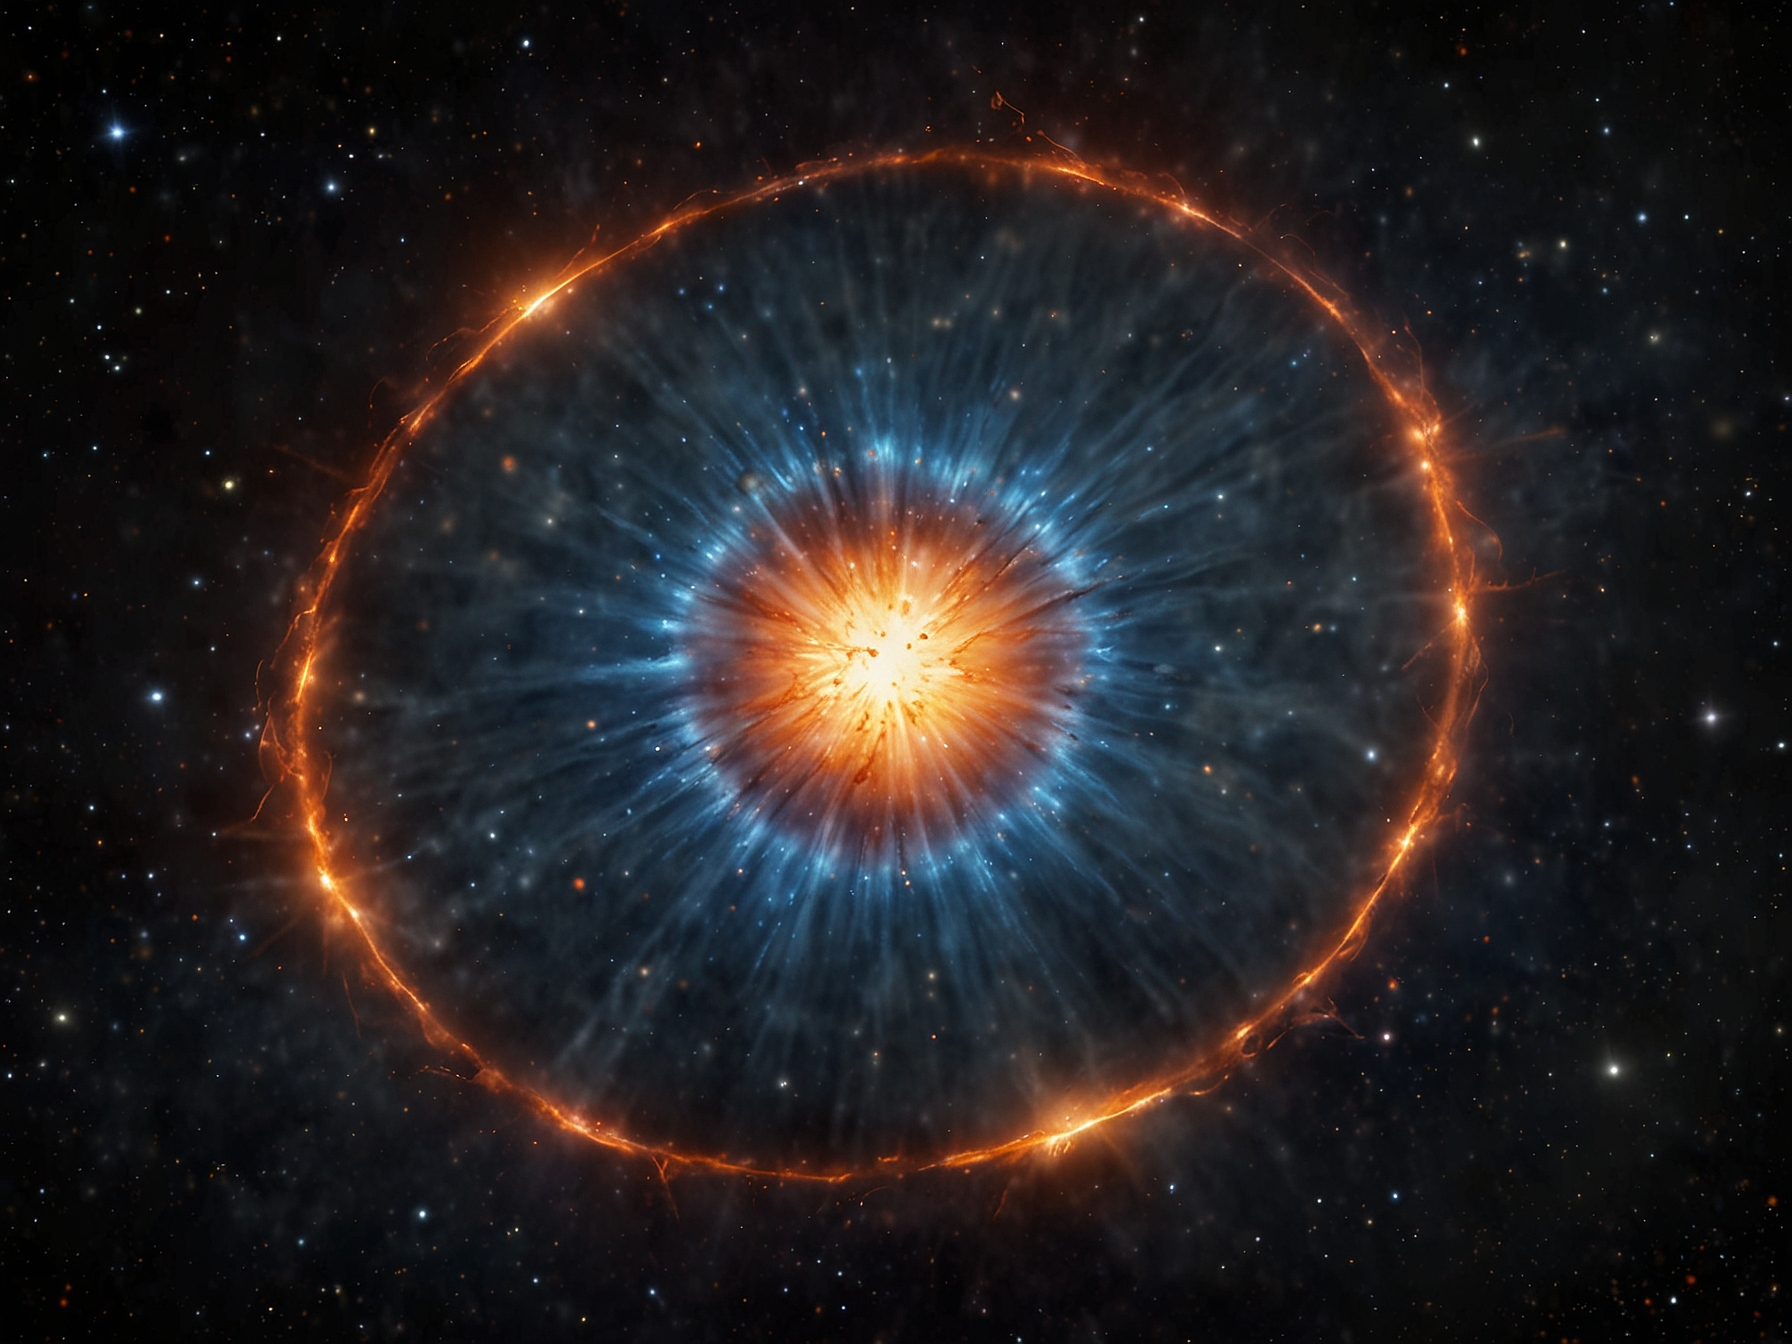 Illustration showing the supernova remnant 3C 58, home to the neutron star PSR J0205+6449. X-ray emissions from this star help scientists study matter under extreme densities.